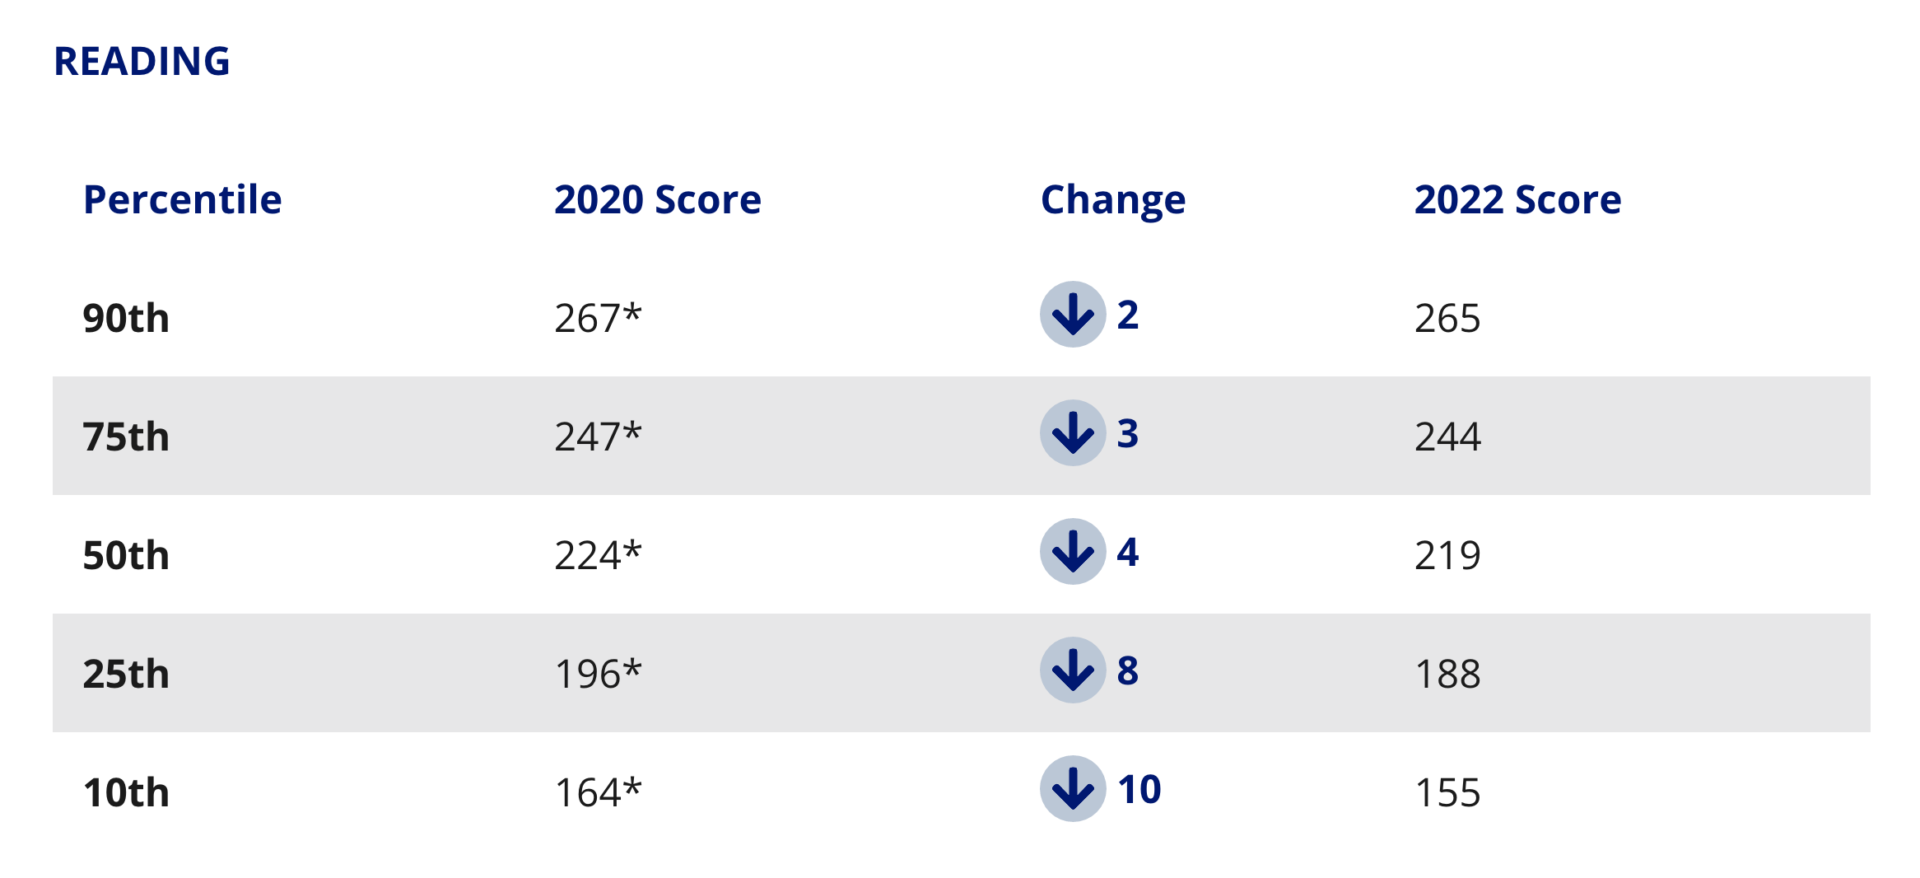 A table of the 2022 NAEP results showing how students' reading scores dropped in the 90th, 75th, 50th, 25th, and 10th percentiles.